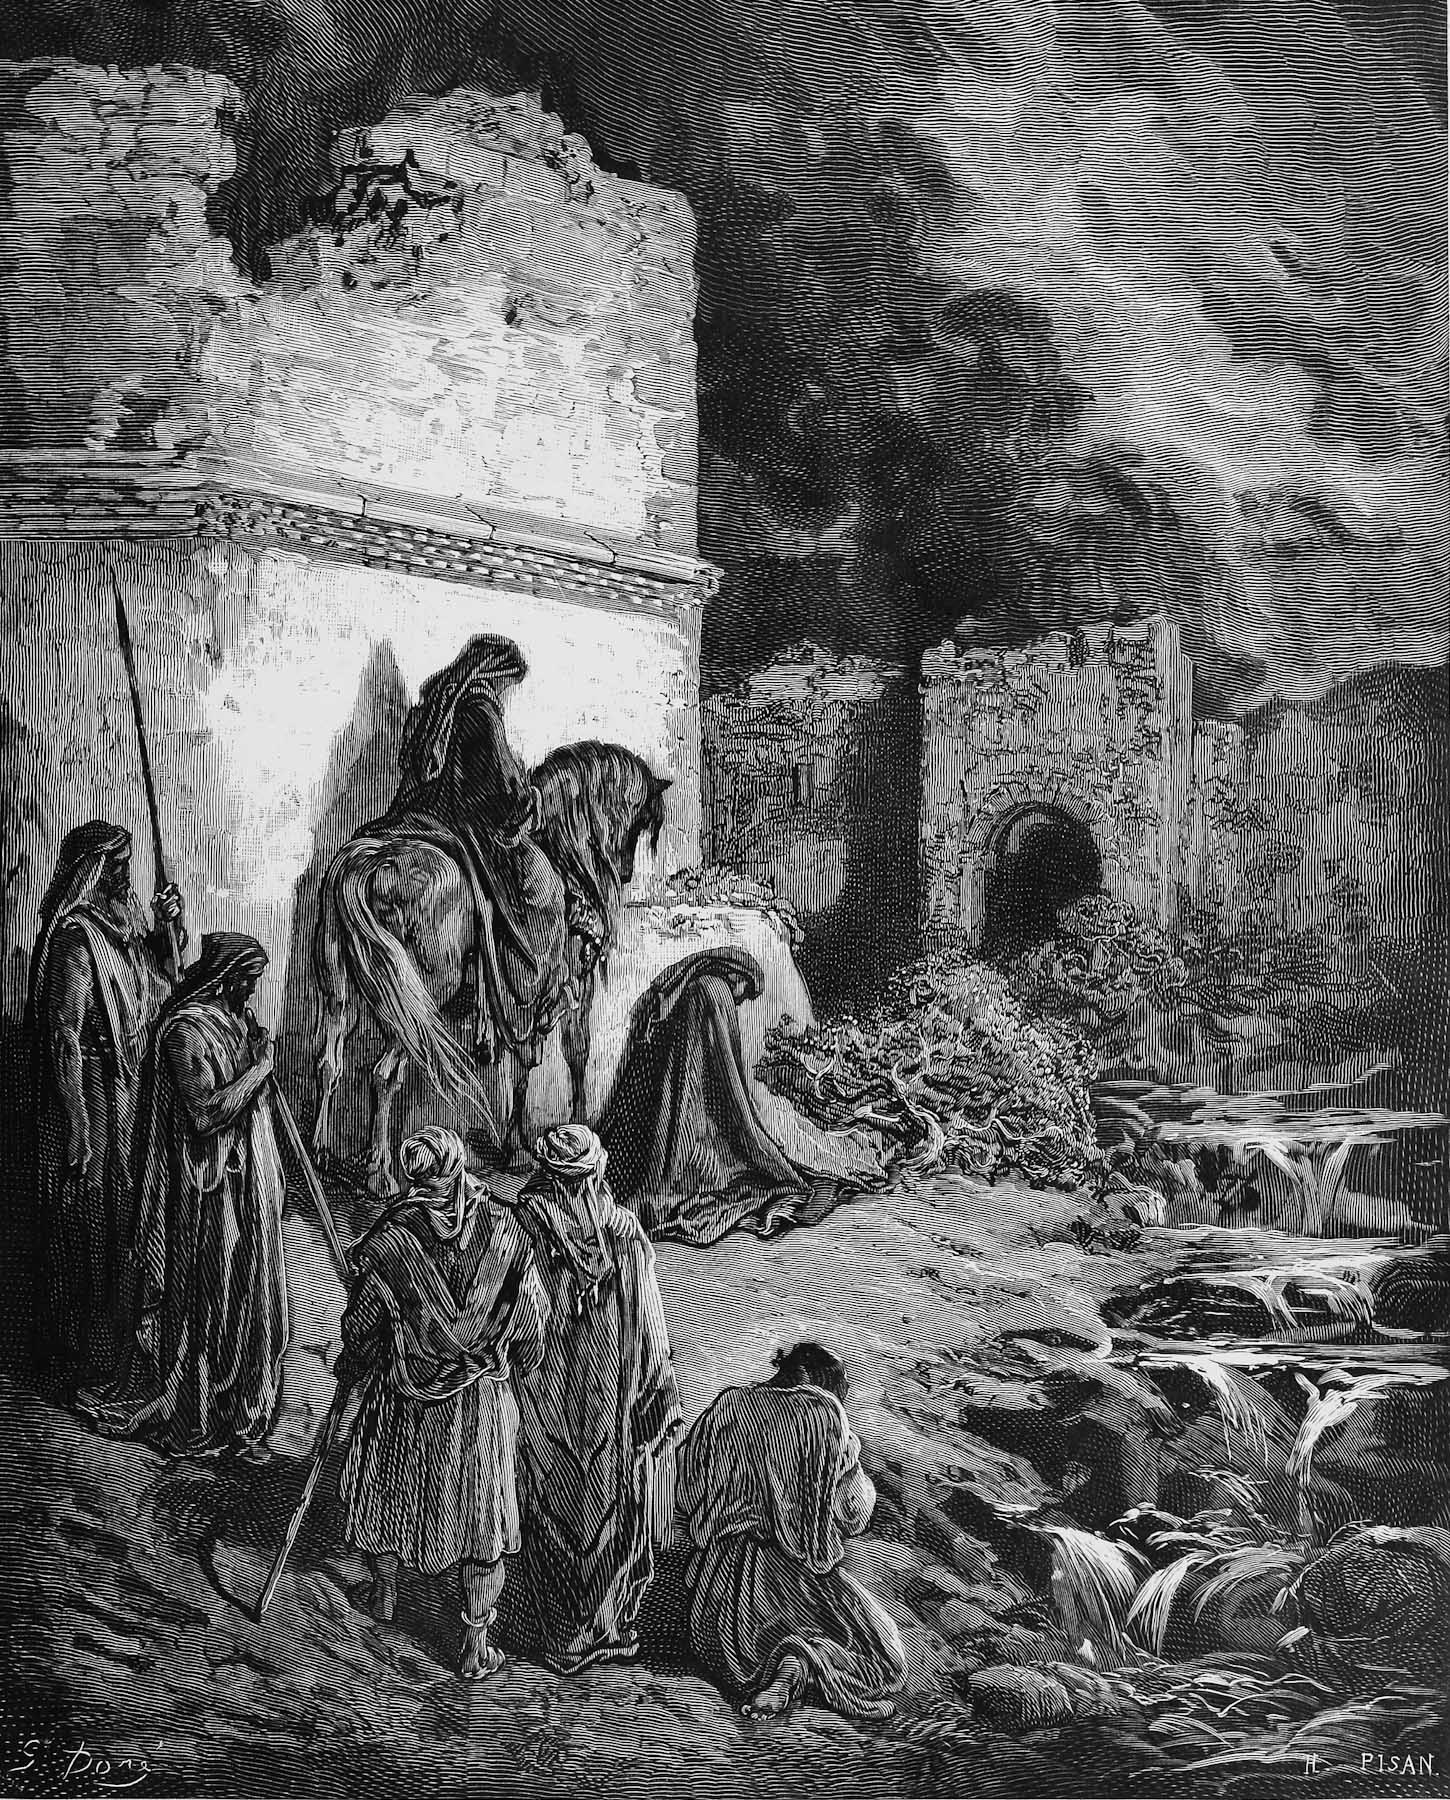 Nehemiah views the ruins of Jerusalem's walls - Picture from The Holy Scriptures, Old and New Testaments books collection published in 1885, Stuttgart-Germany. Drawings by Gustave Dore.